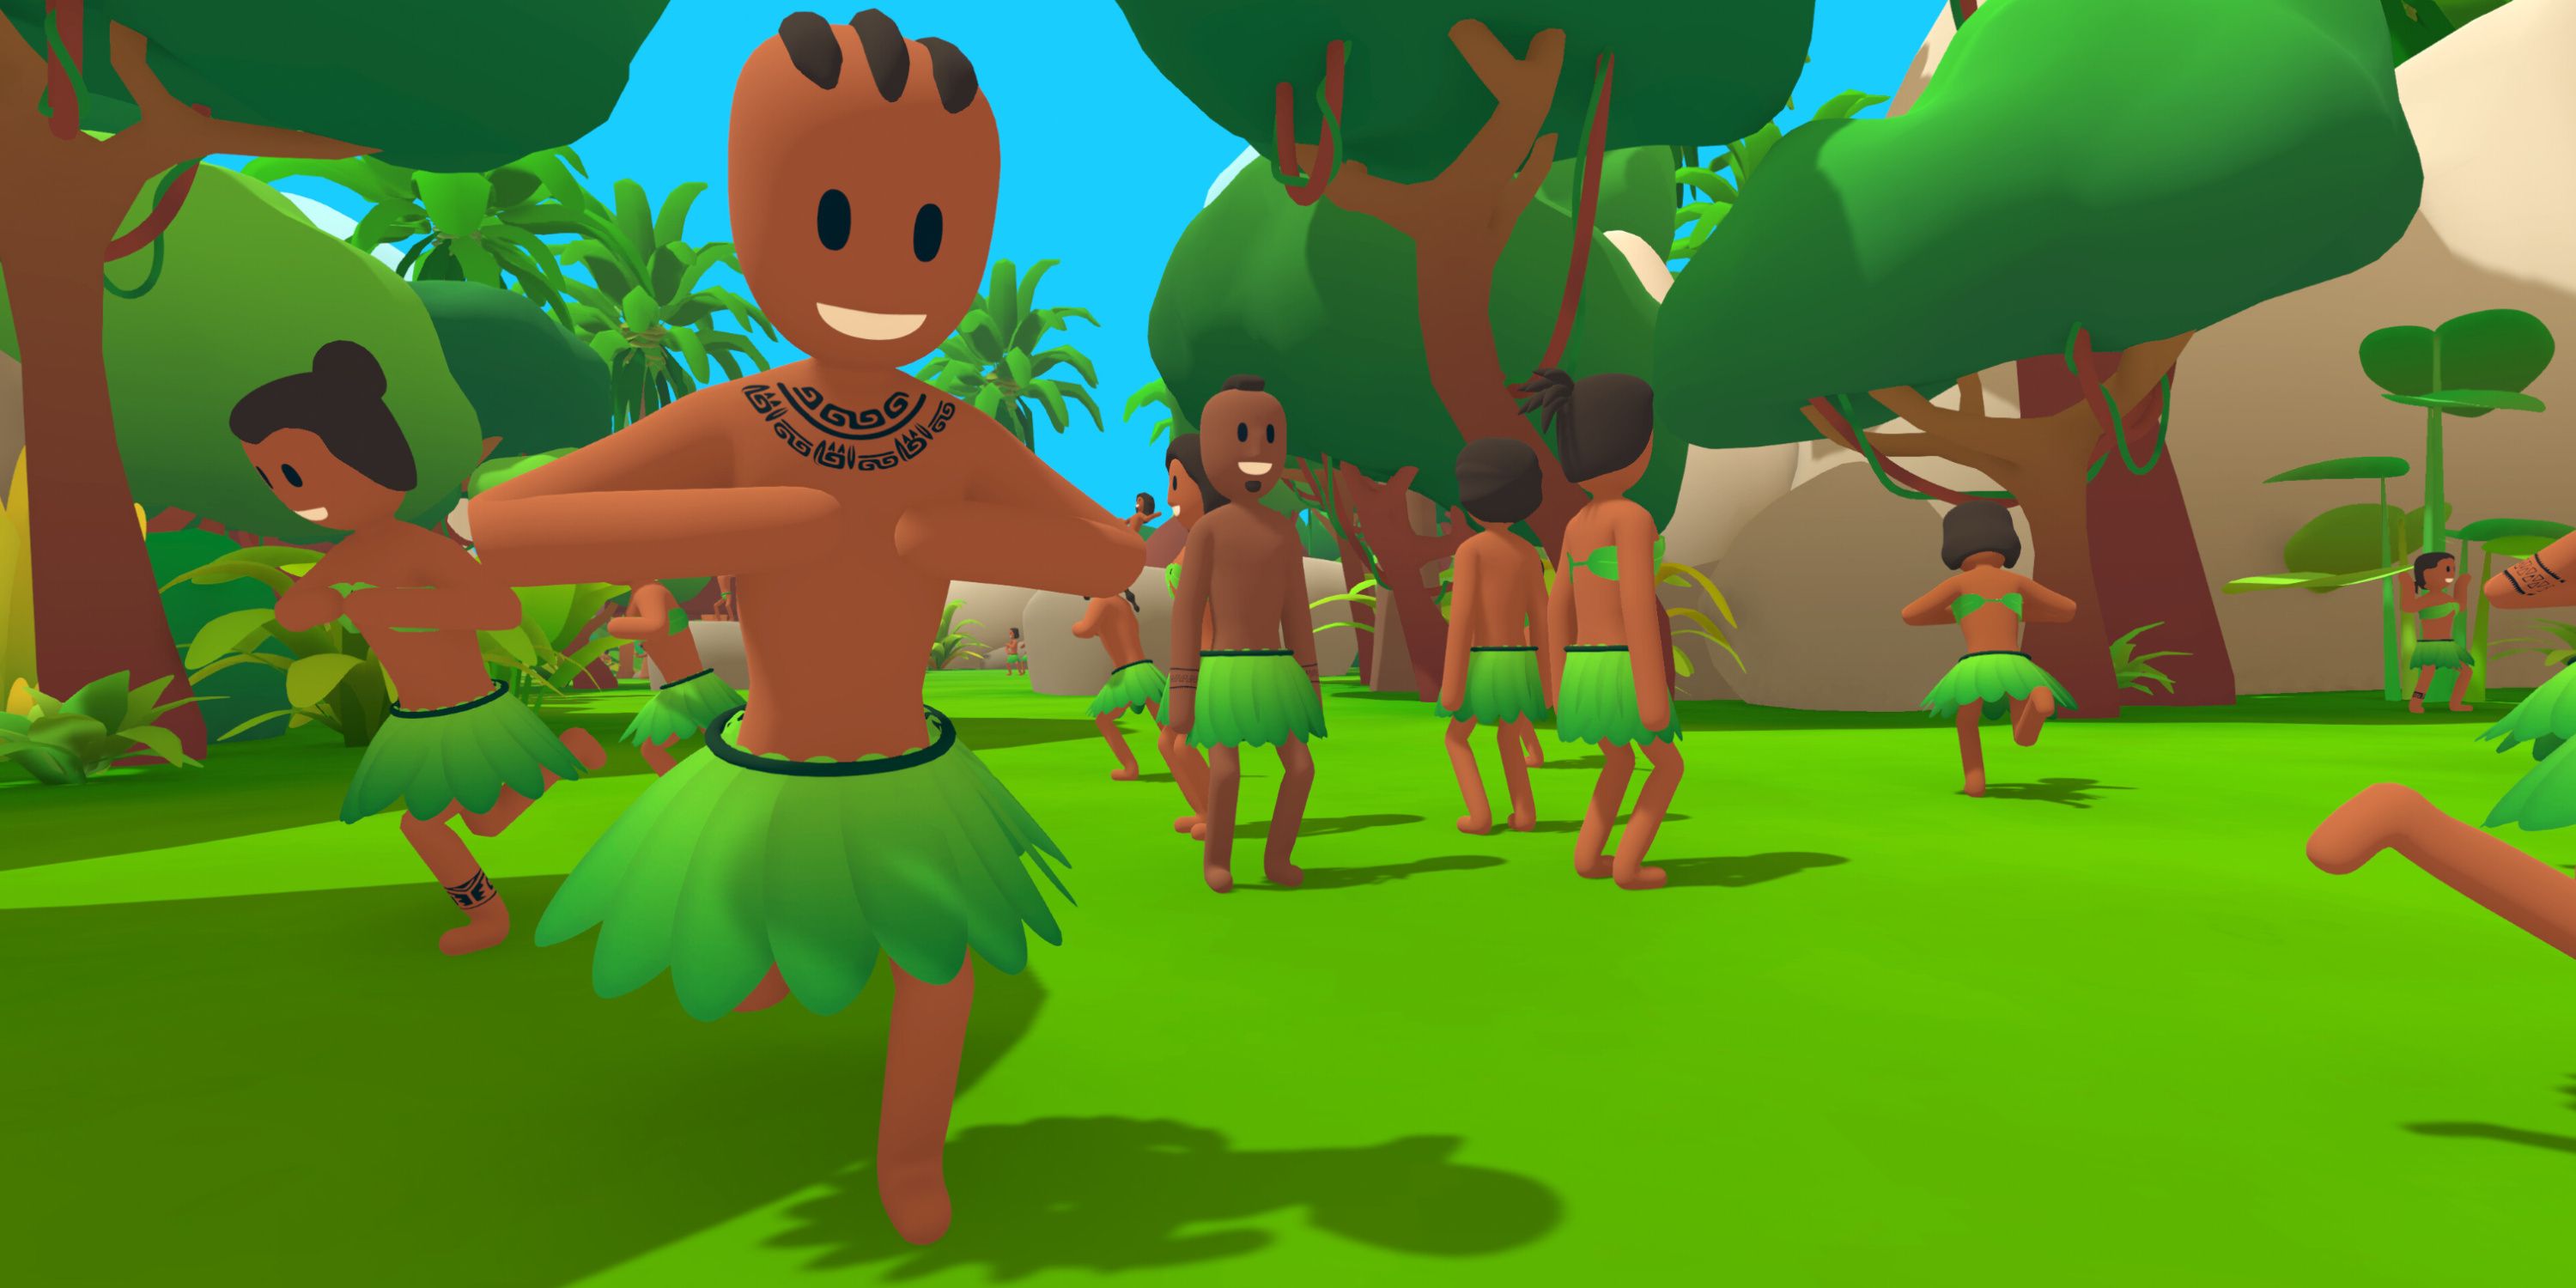 The people of the island dance happily minutes before the disaster strikes